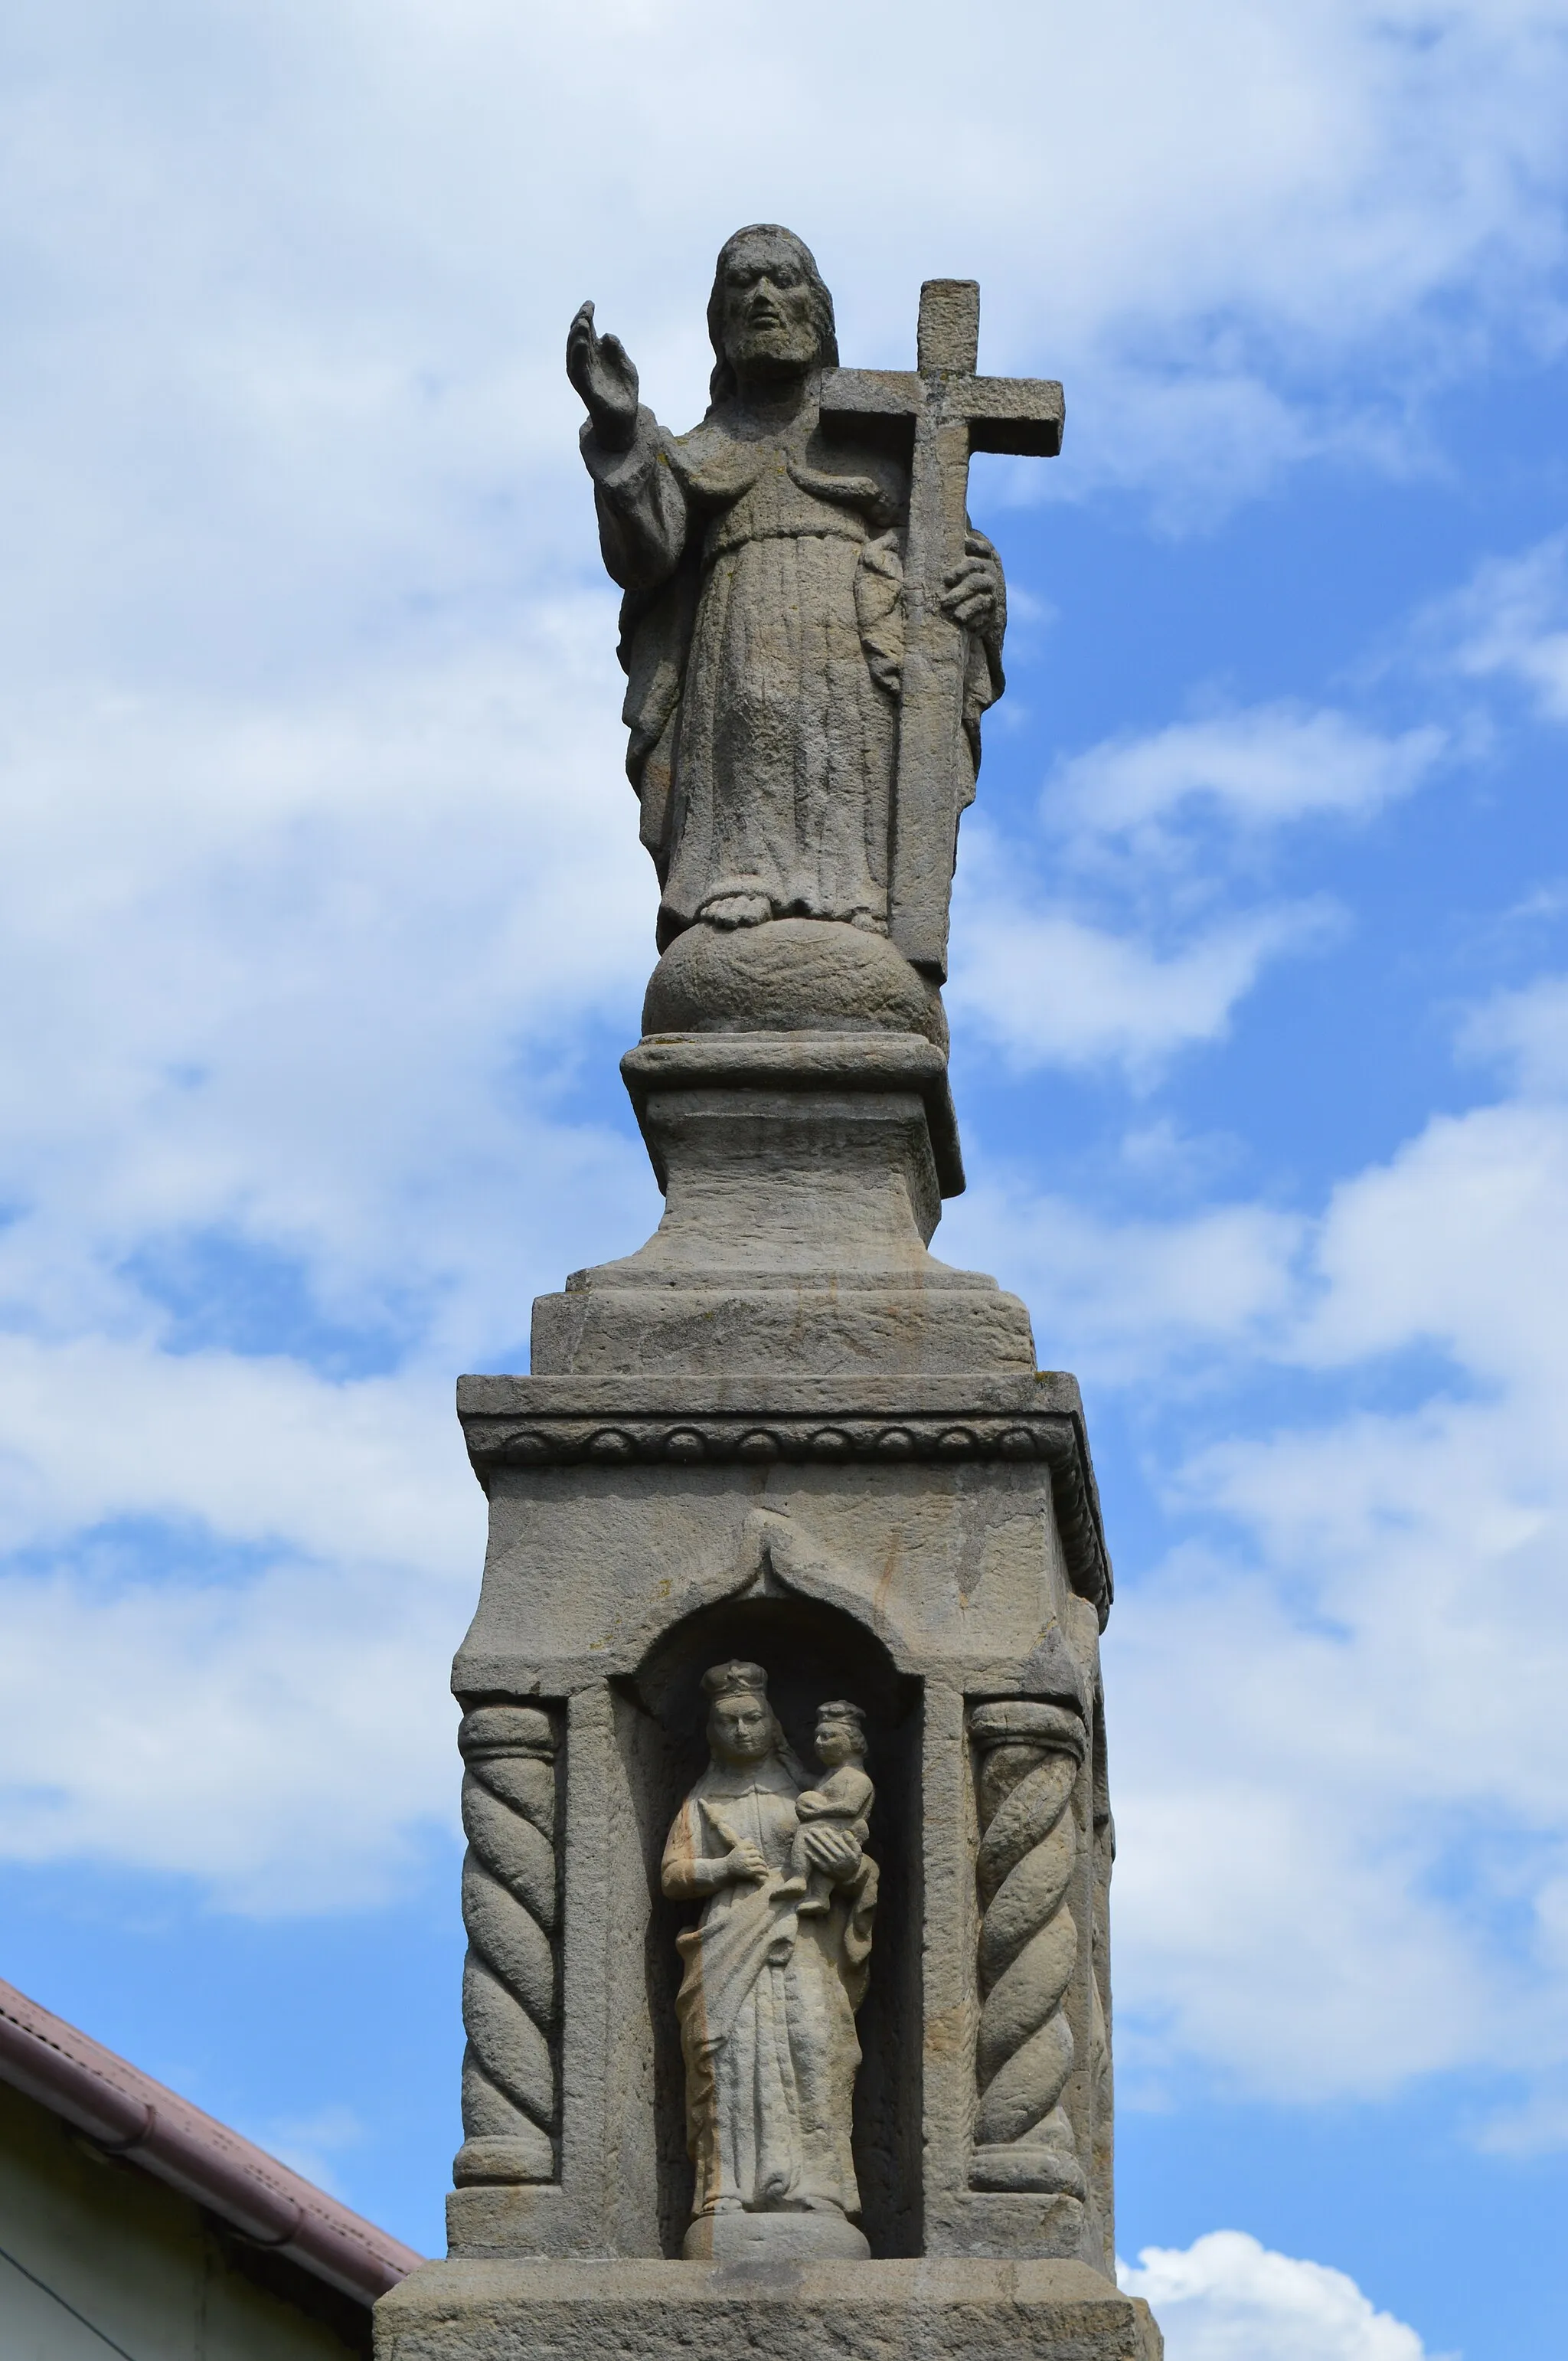 Photo showing: Detail of restored Zastawniaków Jakob and Mary Shrine Sculpture in Gdów (1864). The Scotch Mist Gallery contains many photographs of historic buildings, monuments and memorials of Poland.